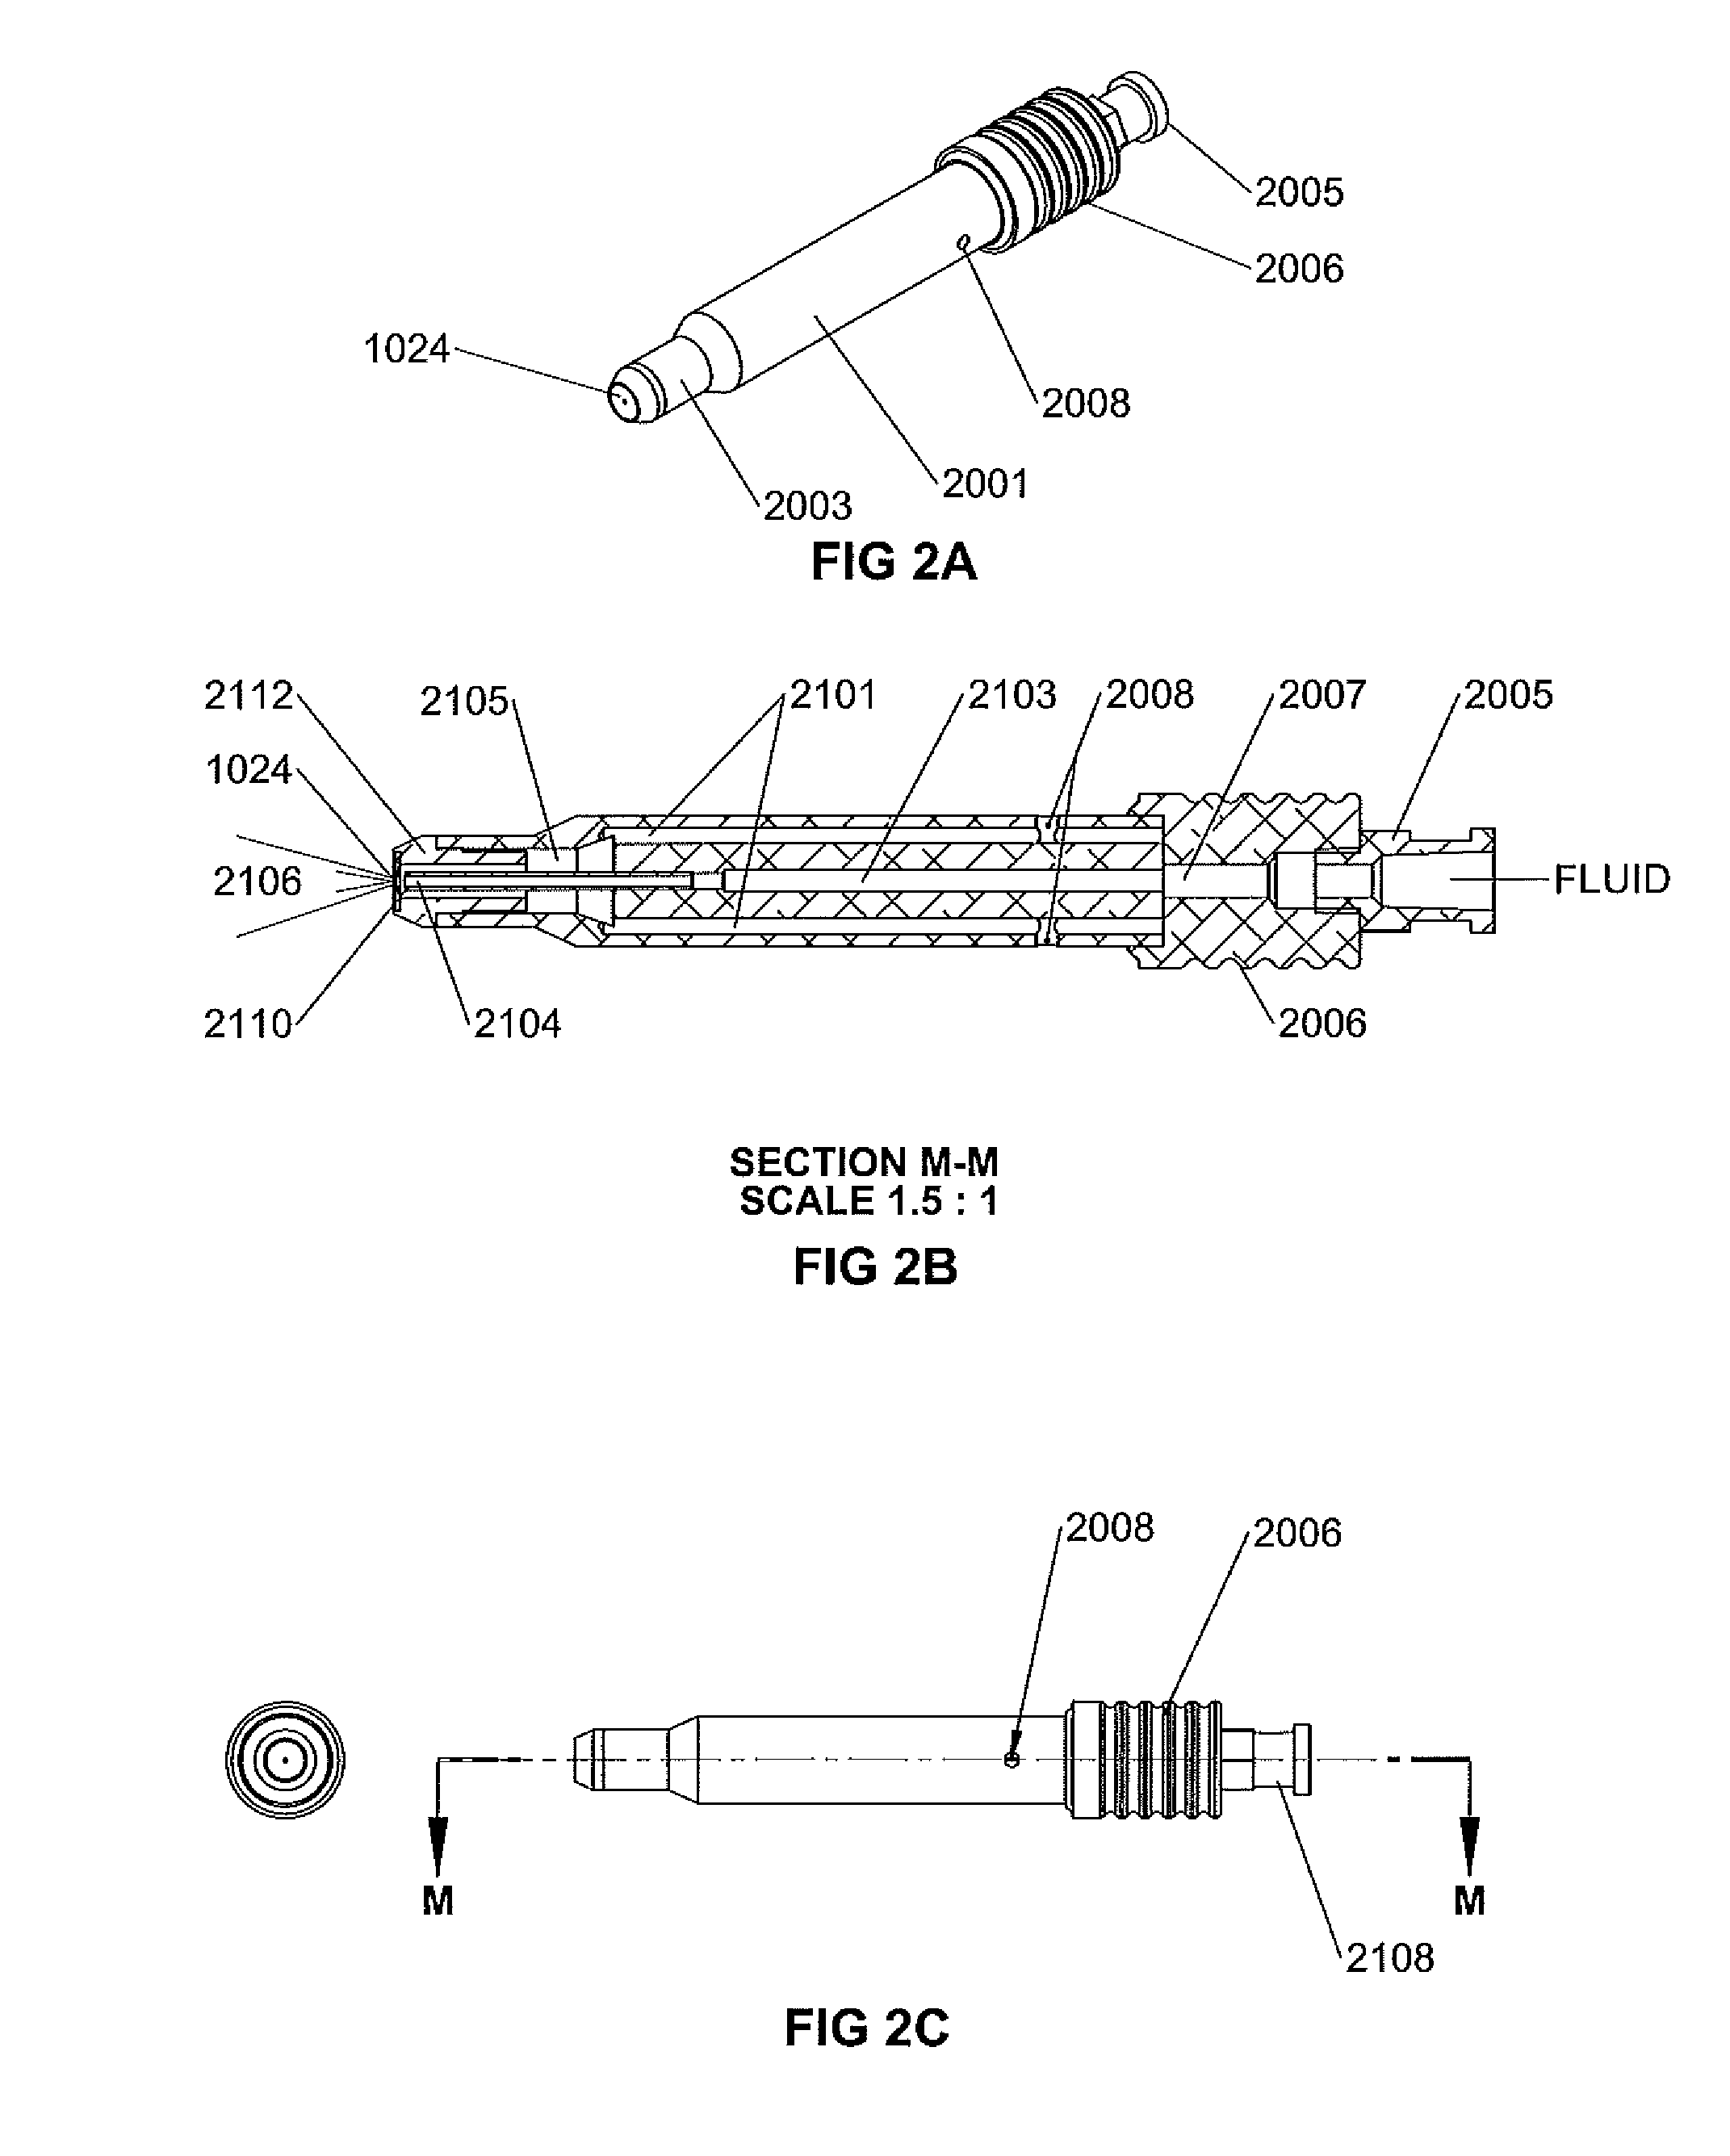 Concentrator for increasing the particle concentration in an aerosol flow